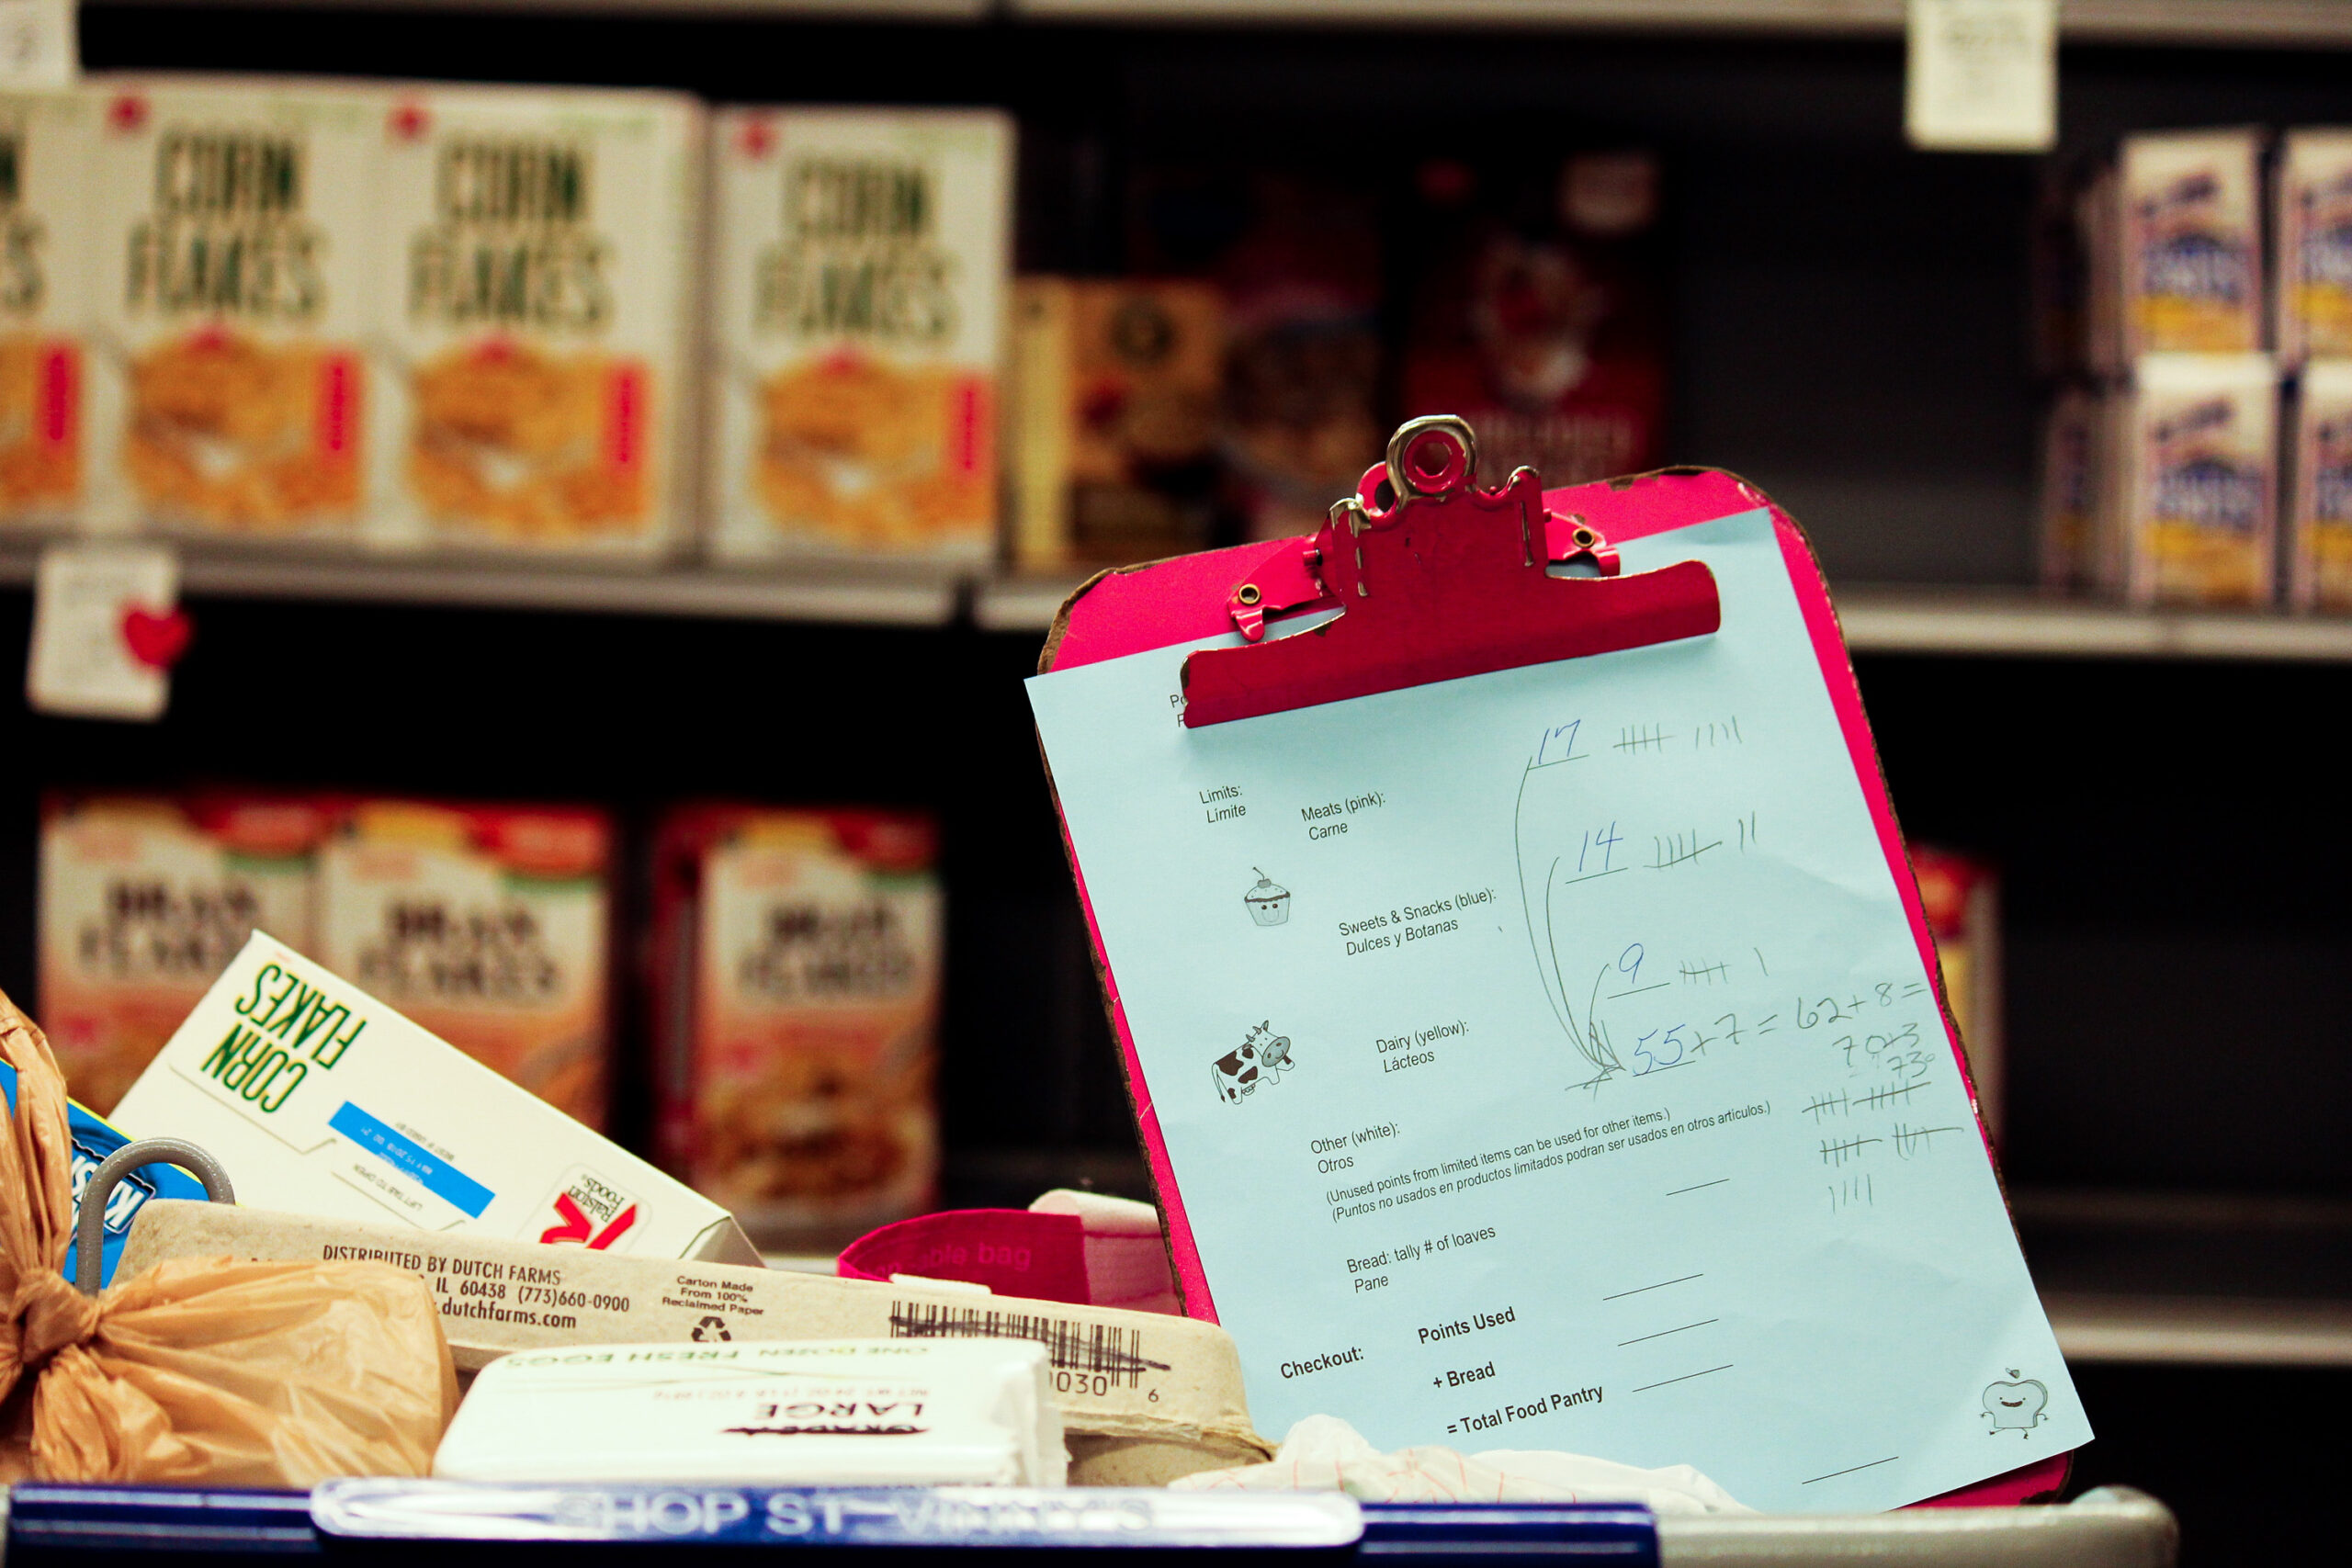 A food group checklist is seen in the shopping cart of a patron at the St. Vincent de Paul Society Food pantry